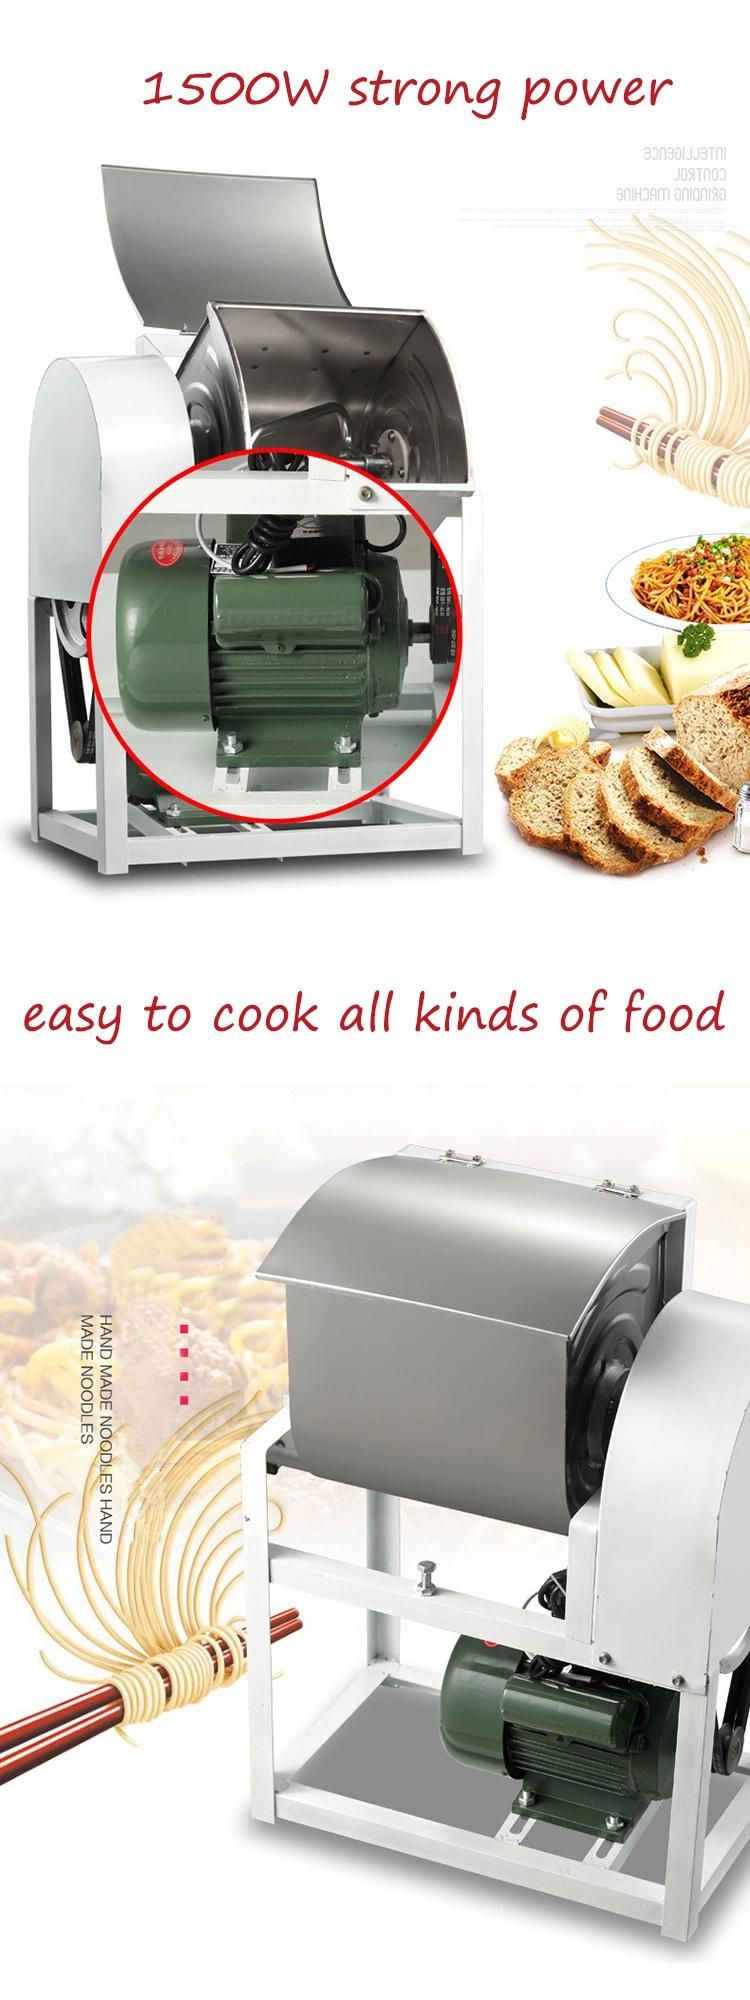 Horizontal Automatic Industry Spiral Mixer Flour Dough Mixer for Biscuit Bread Dough Mixing